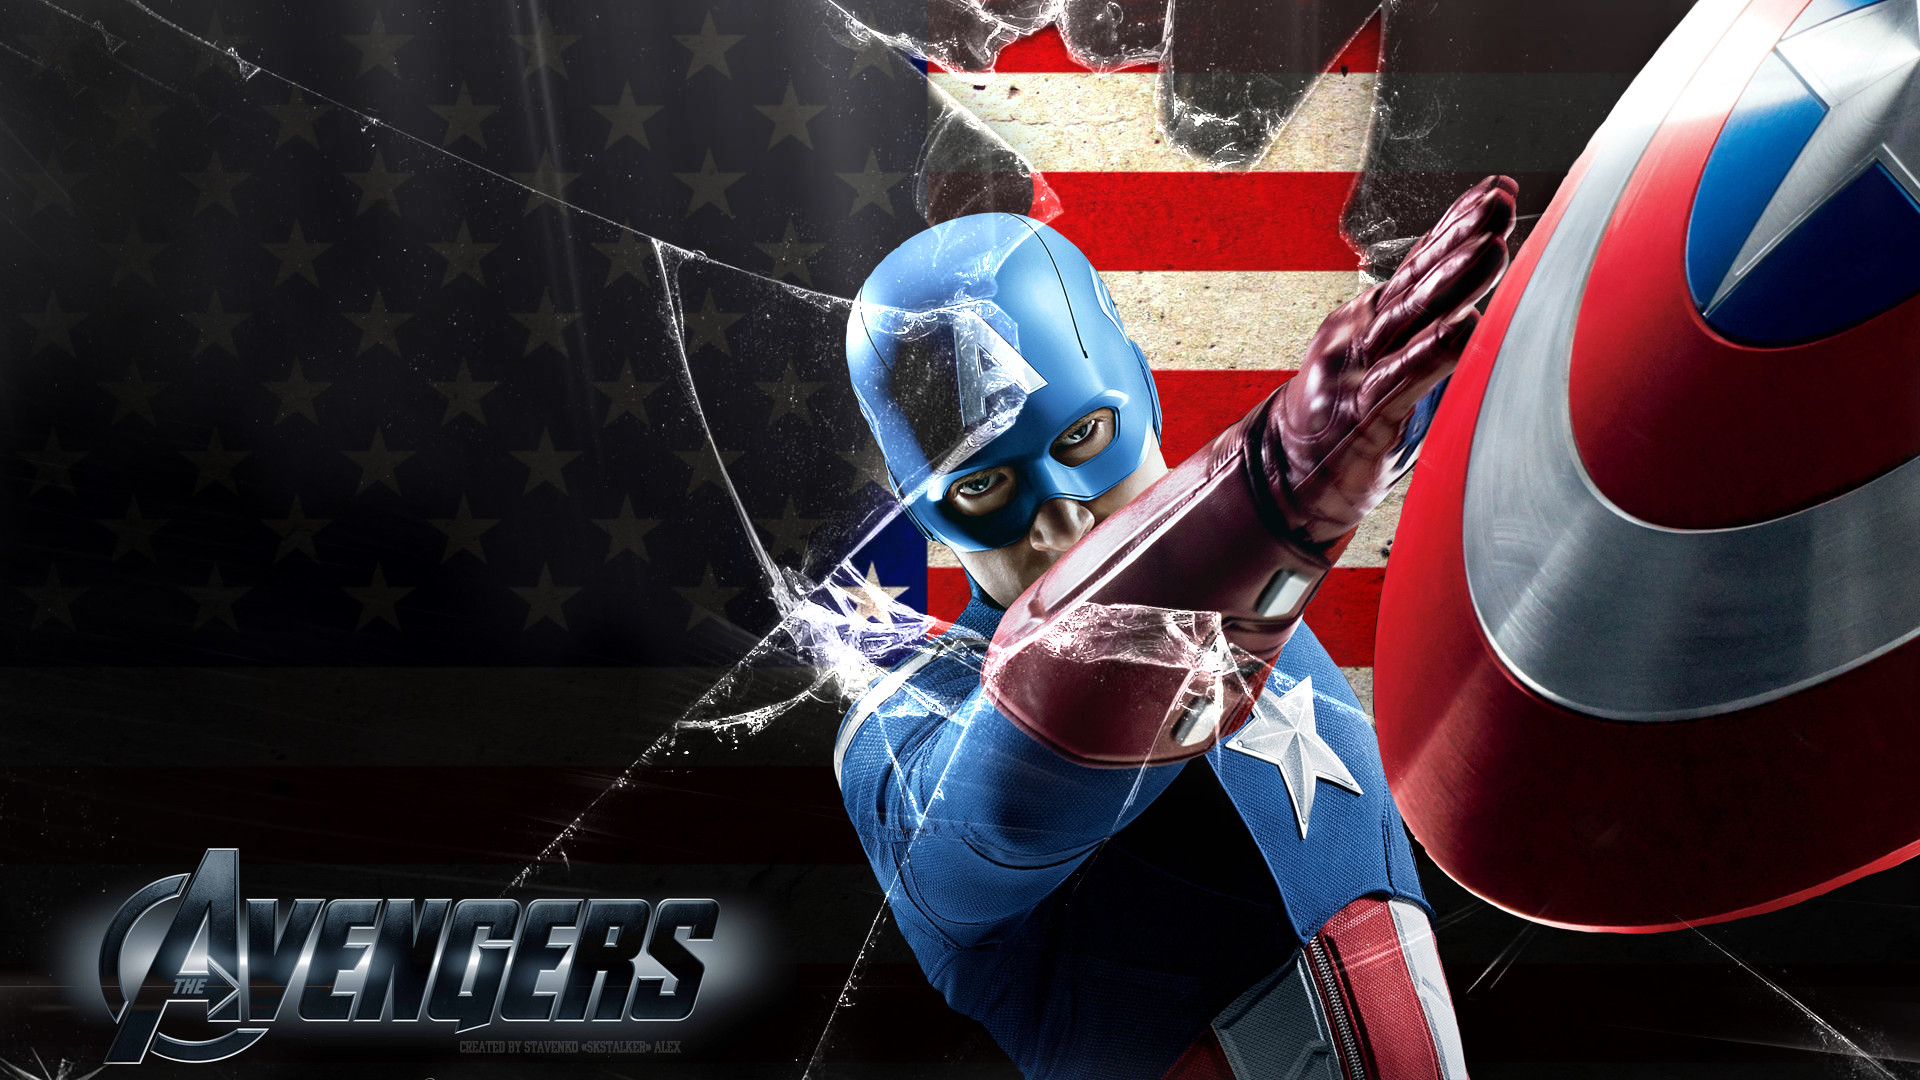 1920x1080 Captain America Avengers Wallpapers For Iphone On Wallpaper Hd 1920 x 1080  px 623.08 KB shield